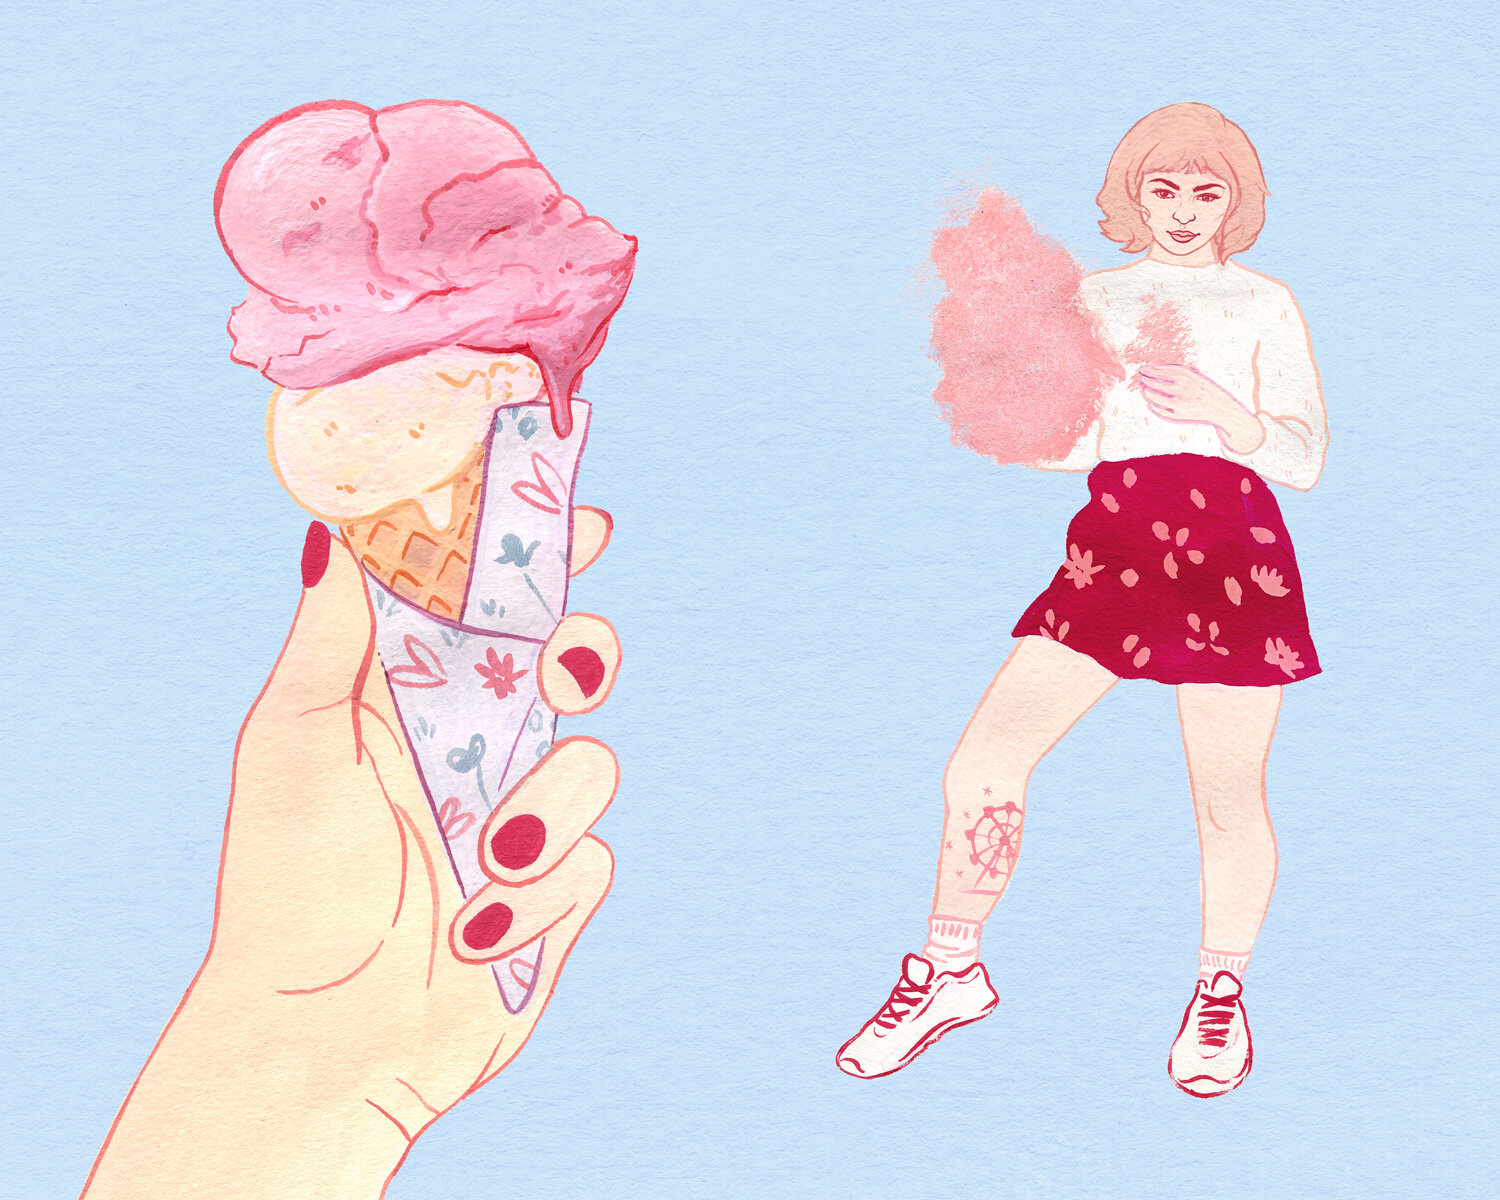 candy-floss-and-ice-cream-duo.jpg